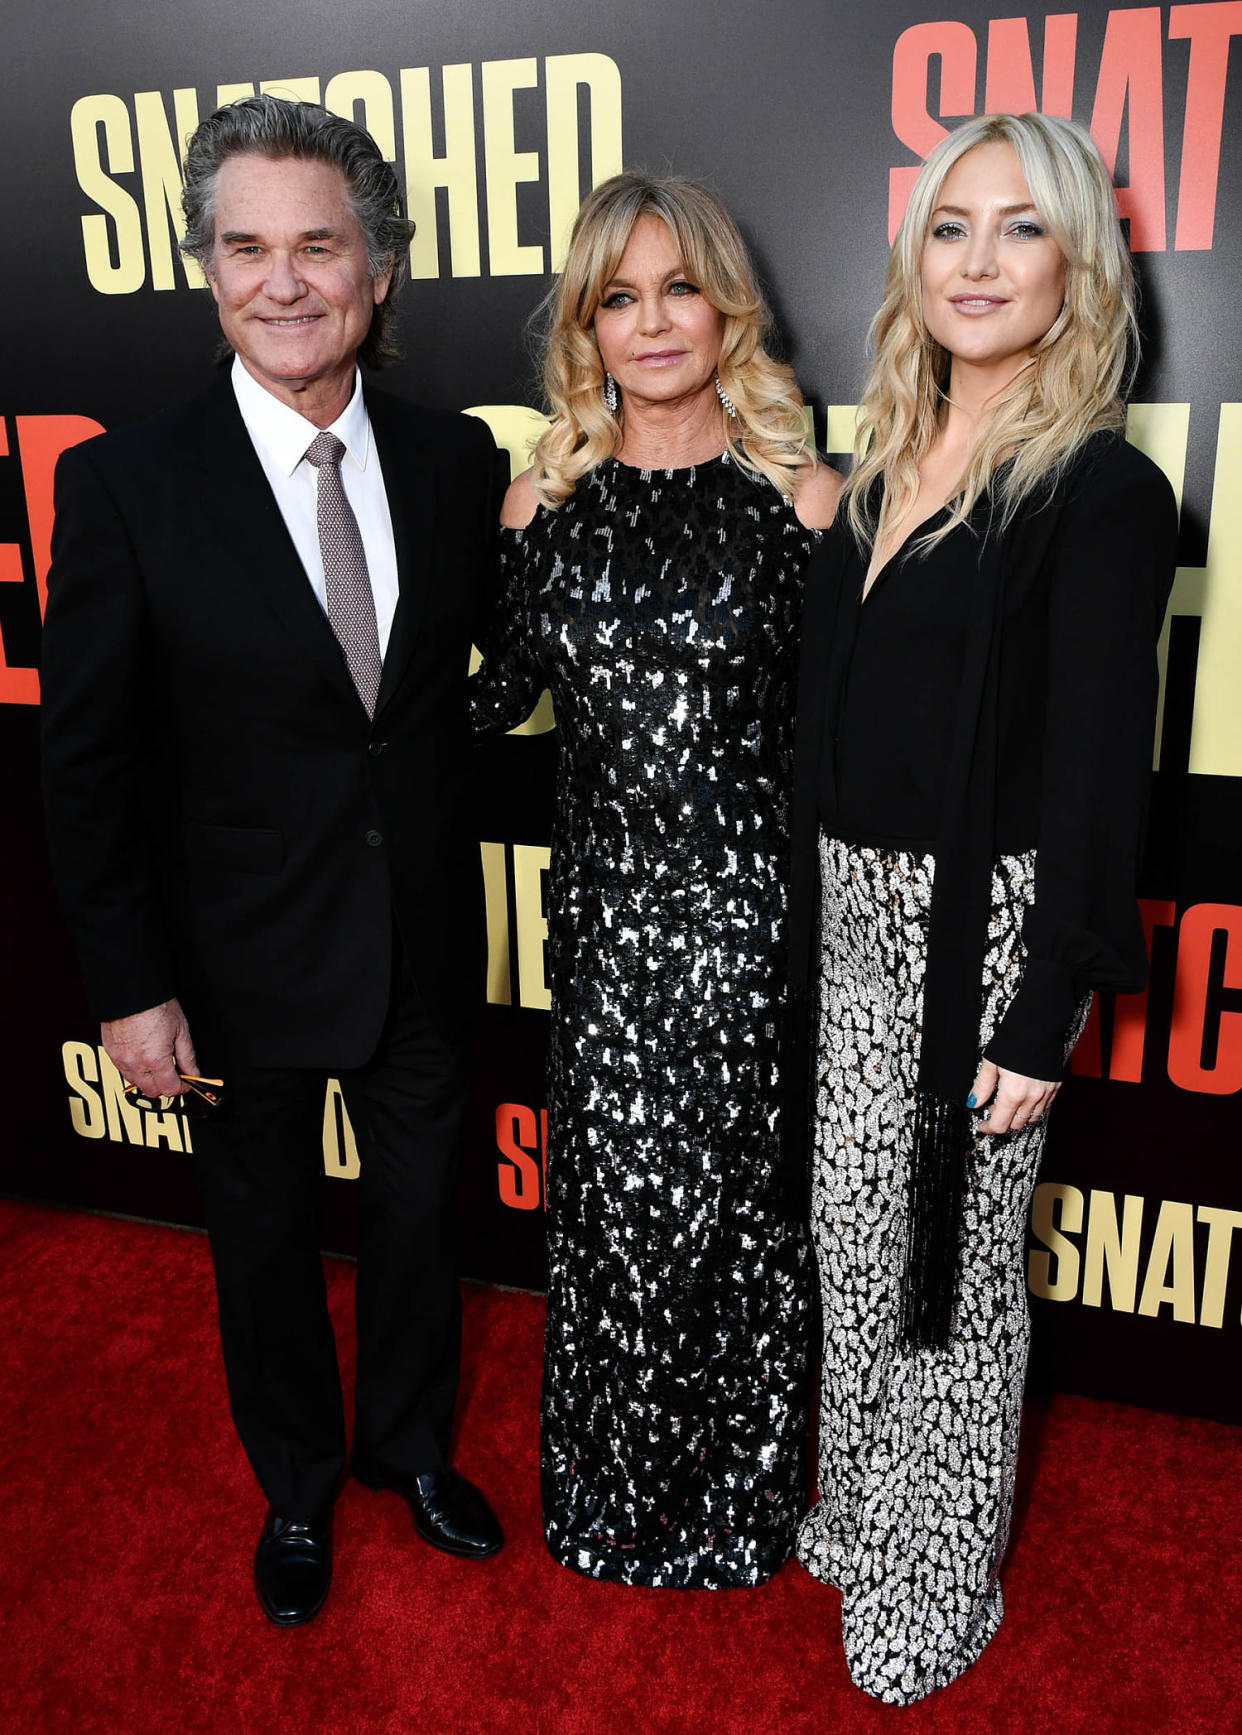 Kurt Russell, Goldie Hawn and Kate Hudson (Variety via Getty Images)